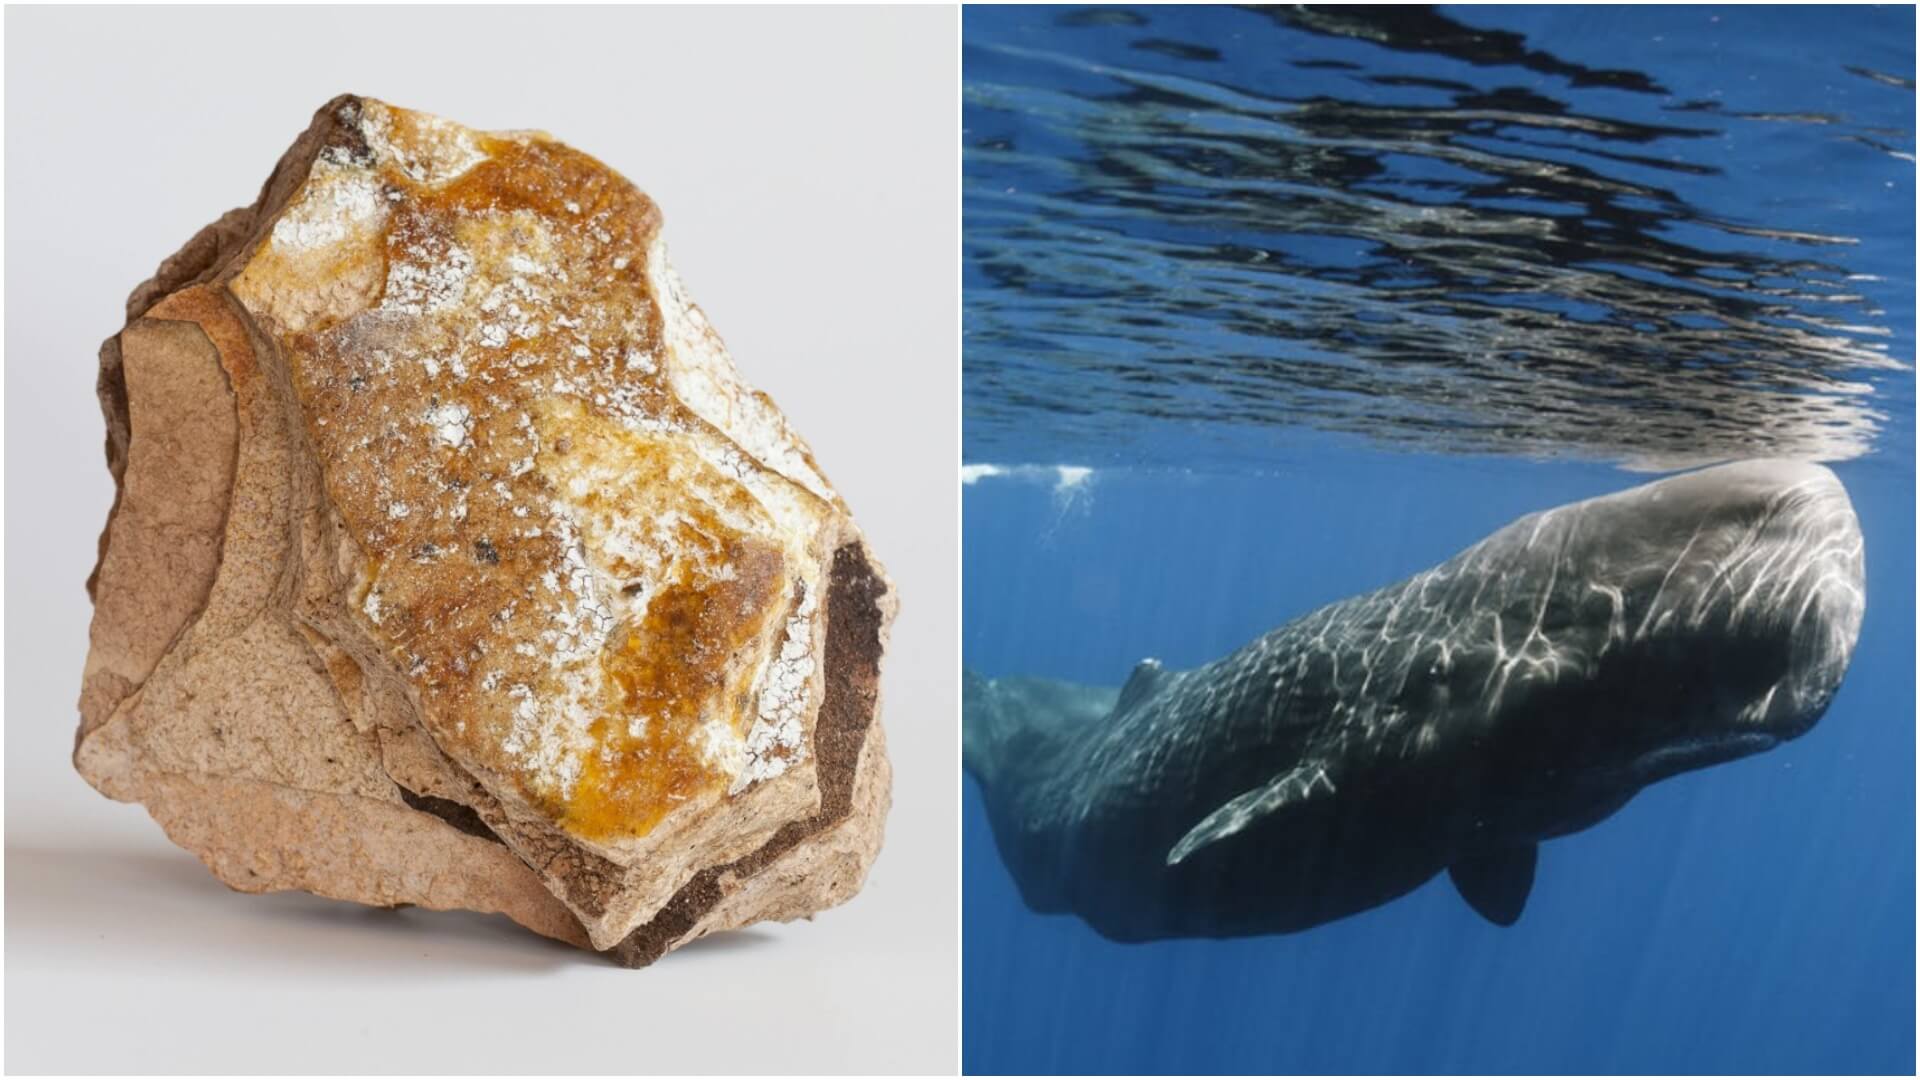 So why exactly is whale vomit so costly?